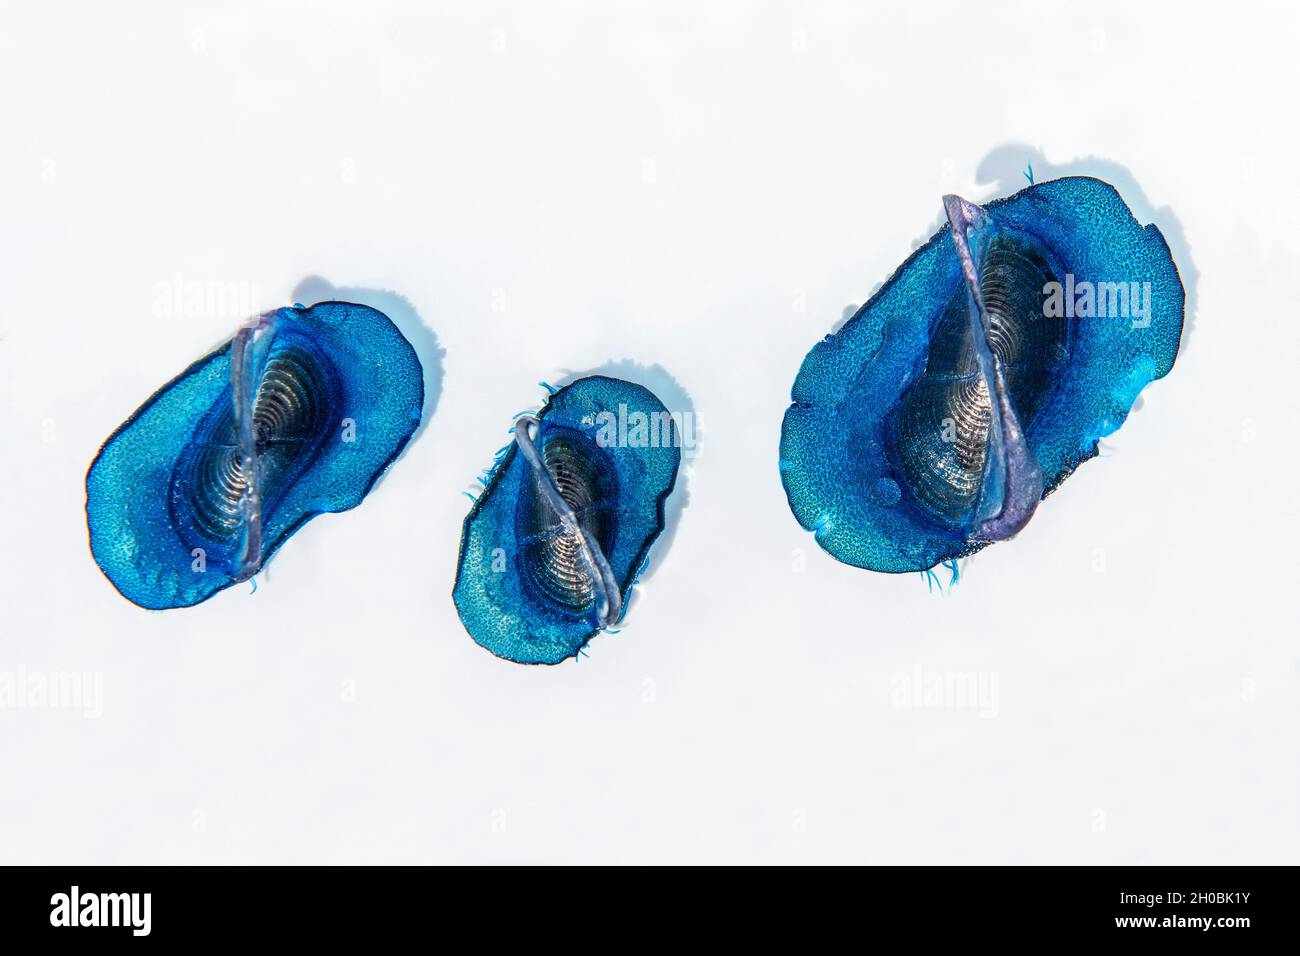 By-the-wind sailor, Sea sail or purple sail (Velella velella), is a small pelagic hydrozoan that appears en masse in some periods of the year. It has Stock Photo